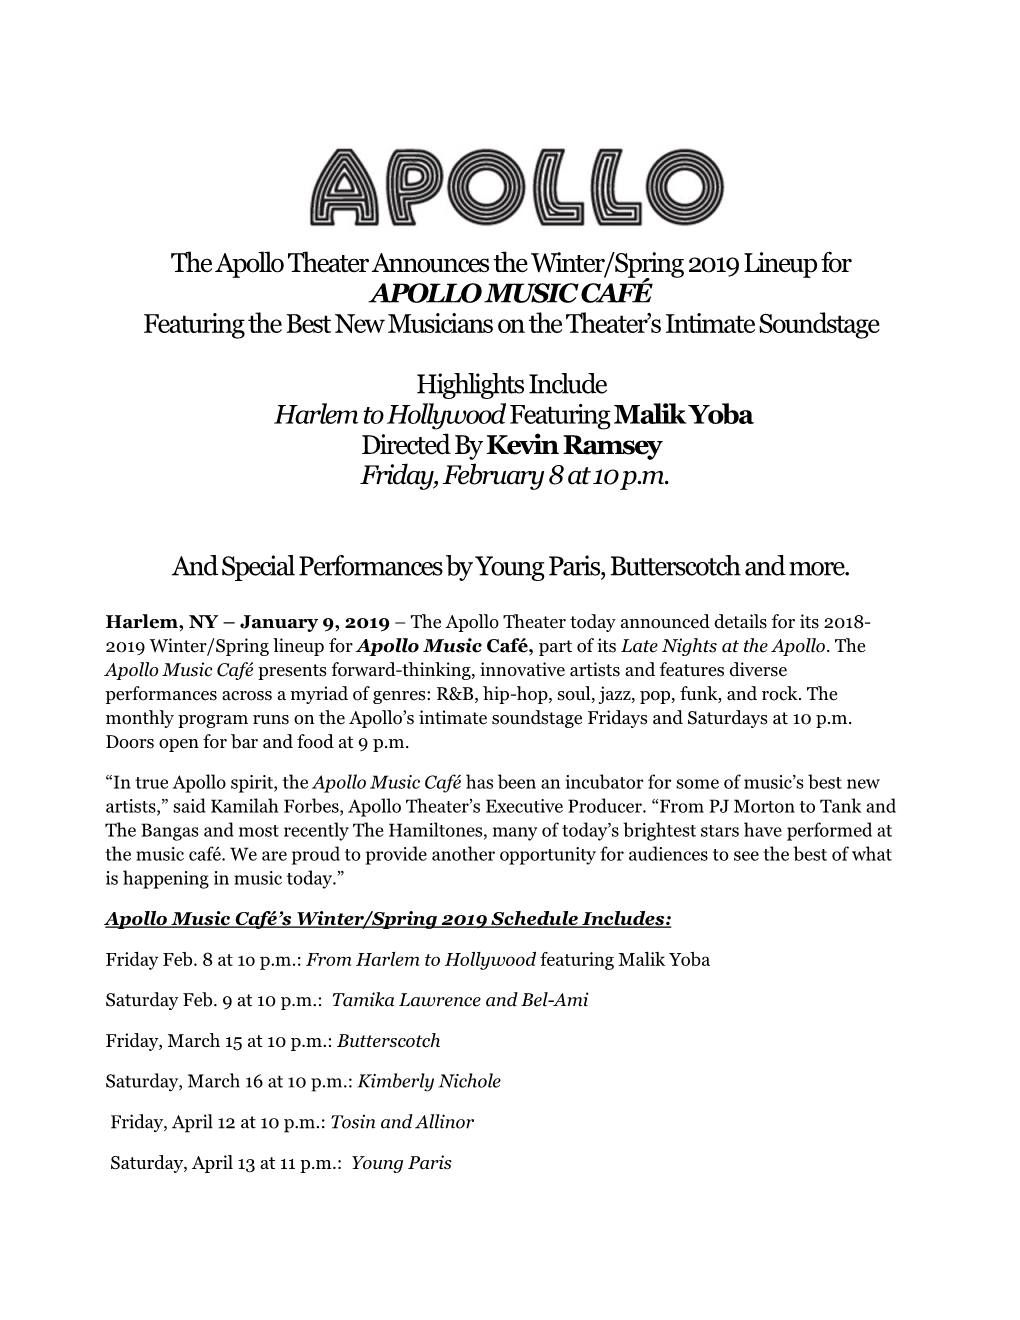 The Apollo Theater Announces the Winter/Spring 2019 Lineup for APOLLO MUSIC CAFÉ Featuring the Best New Musicians on the Theater’S Intimate Soundstage